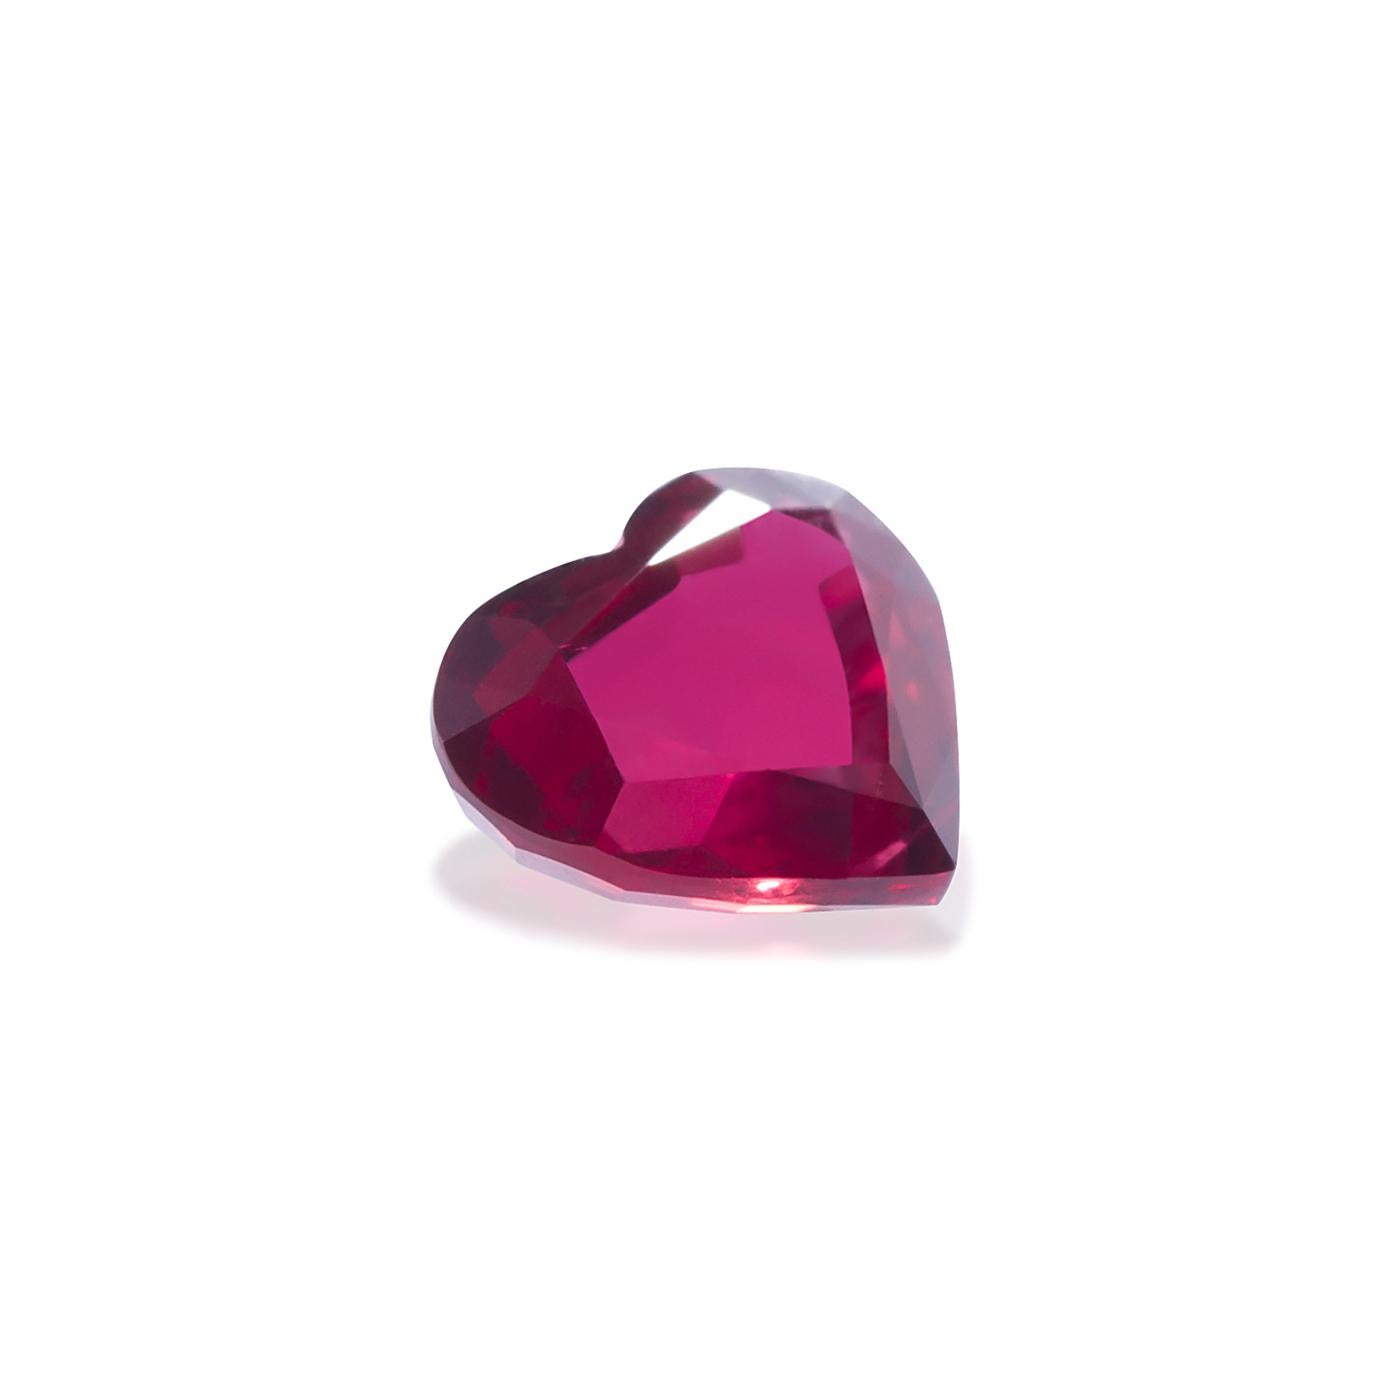 Ruby
Heart Shape
Color Red
Brilliant Cut
Dimension 5.58x6.52x3.42
Weight 1.057 cts.
Country of Origin Mozambique

GEM RARITY: UNEARTHLY THE RAREST GEM

Witness the unique journey of colored gemstones, experience a new level of iconic statements and